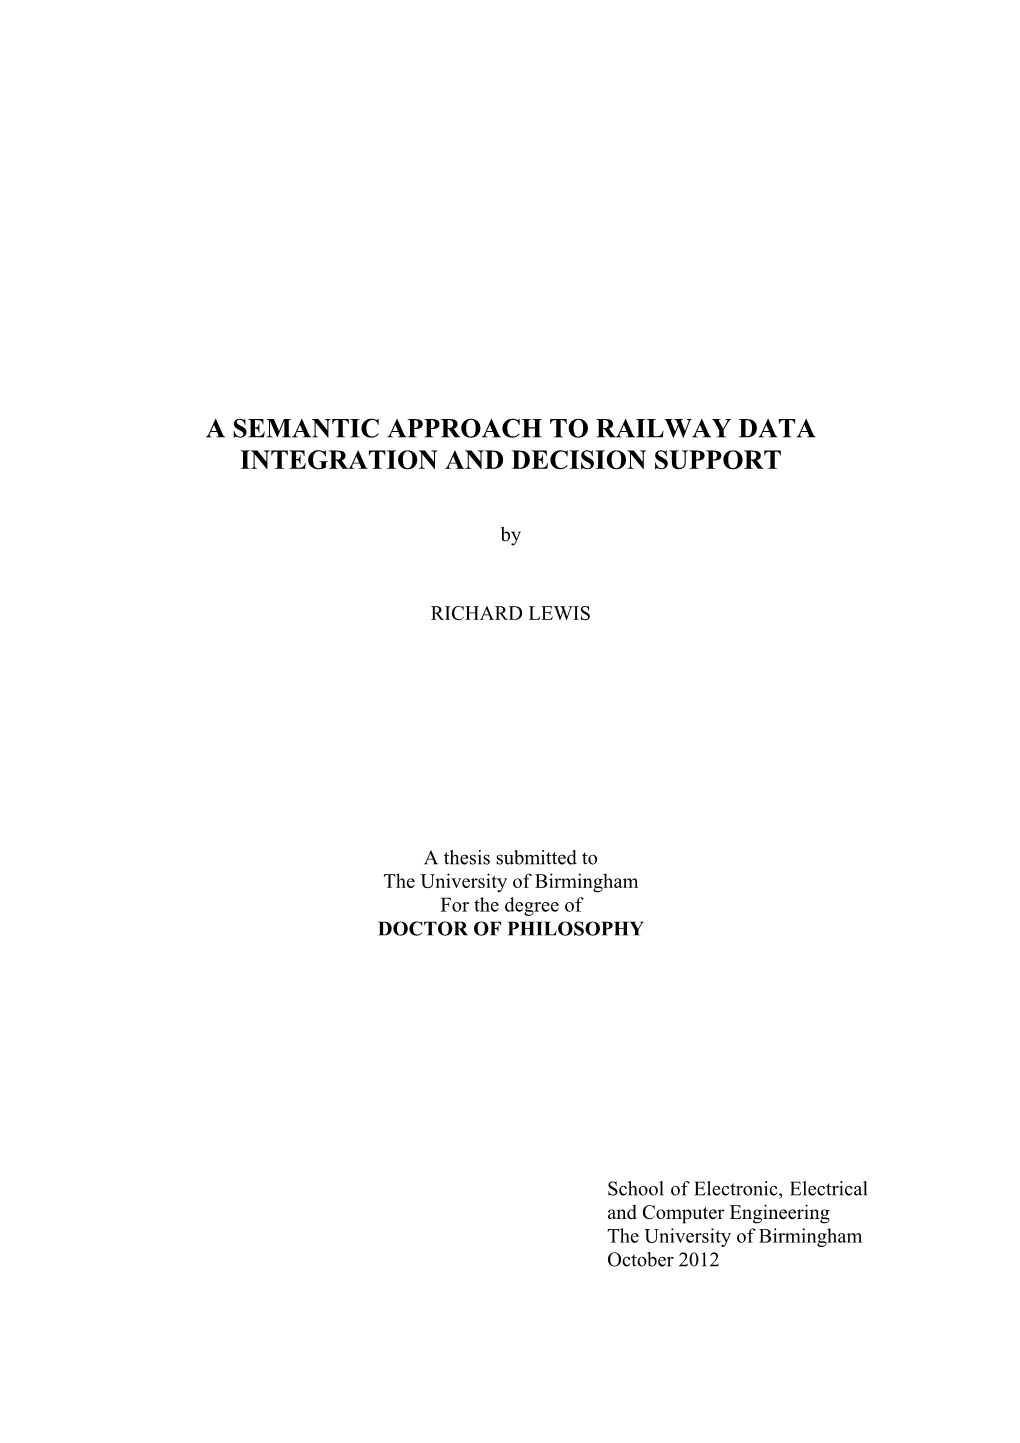 A Semantic Approach to Railway Data Integration and Decision Support